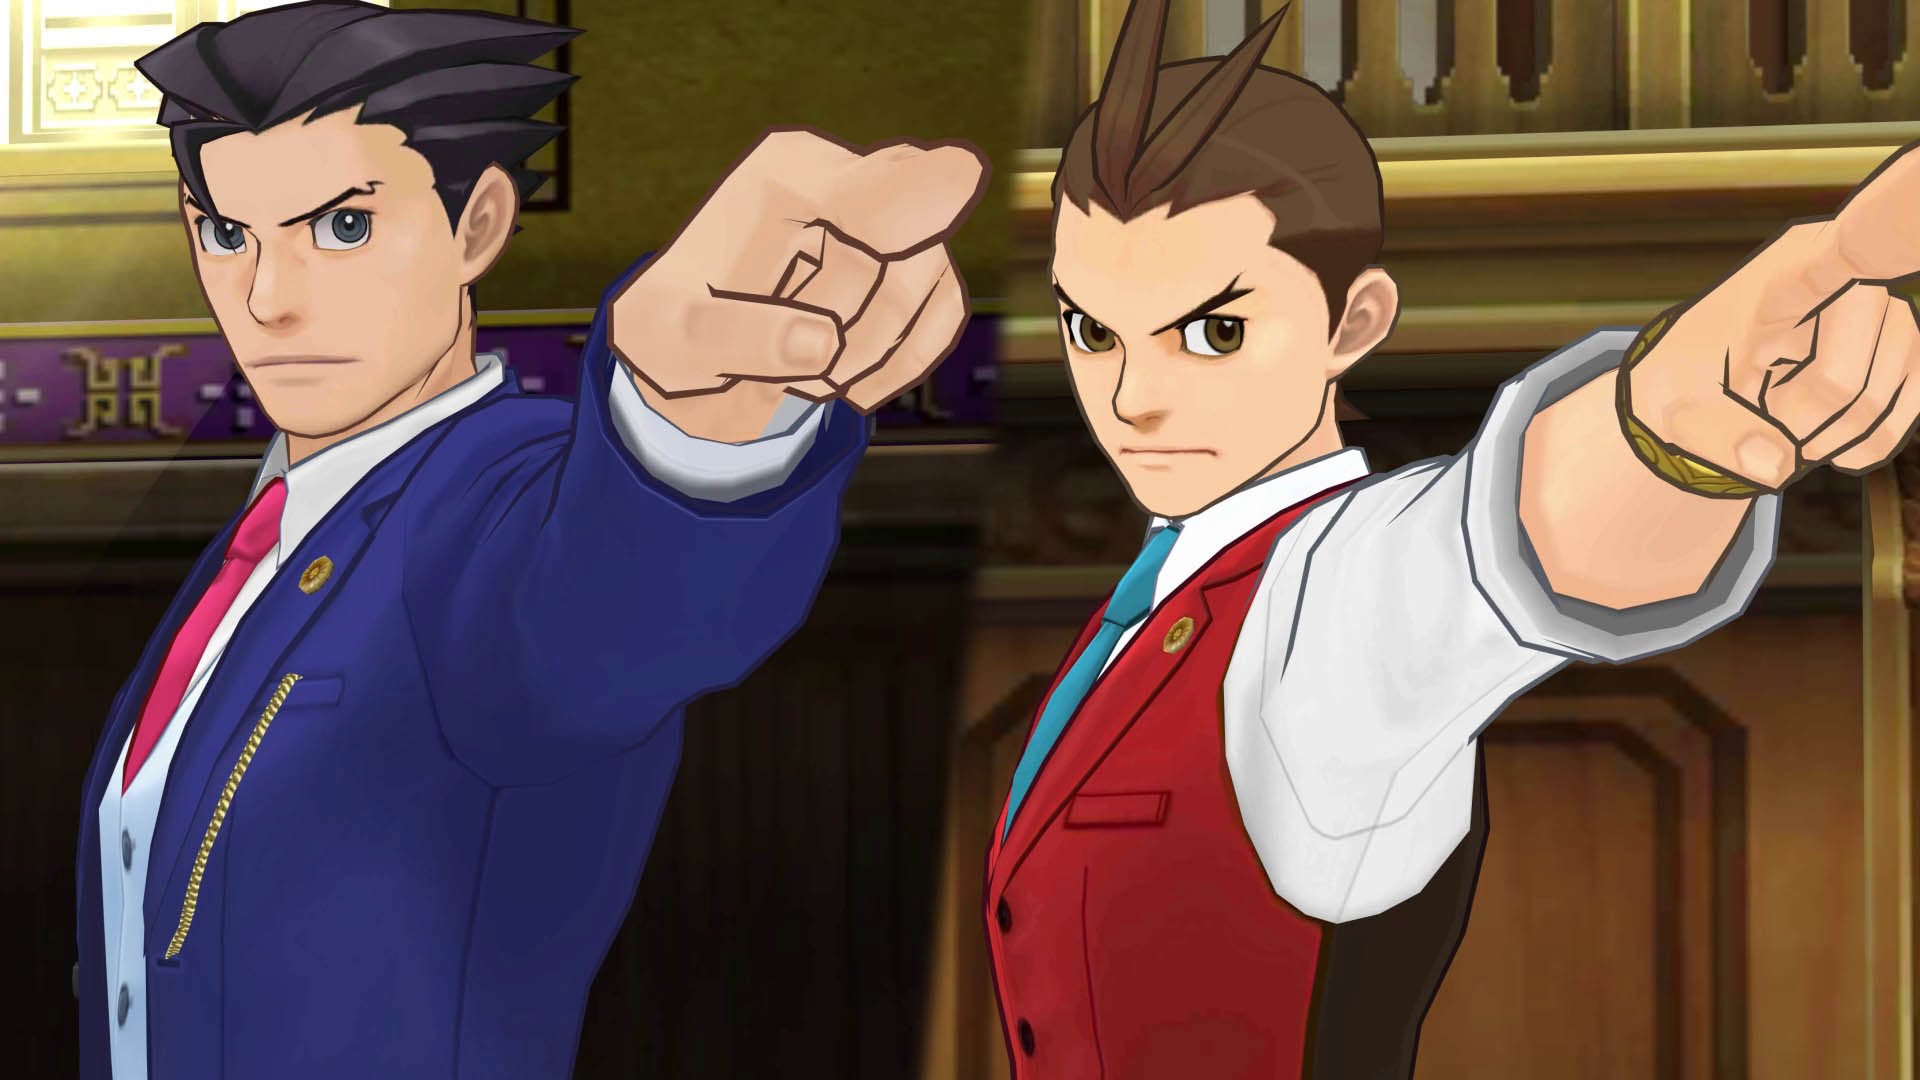 Phoenix Wright: Spirit of Justice gets release date, demo announced.